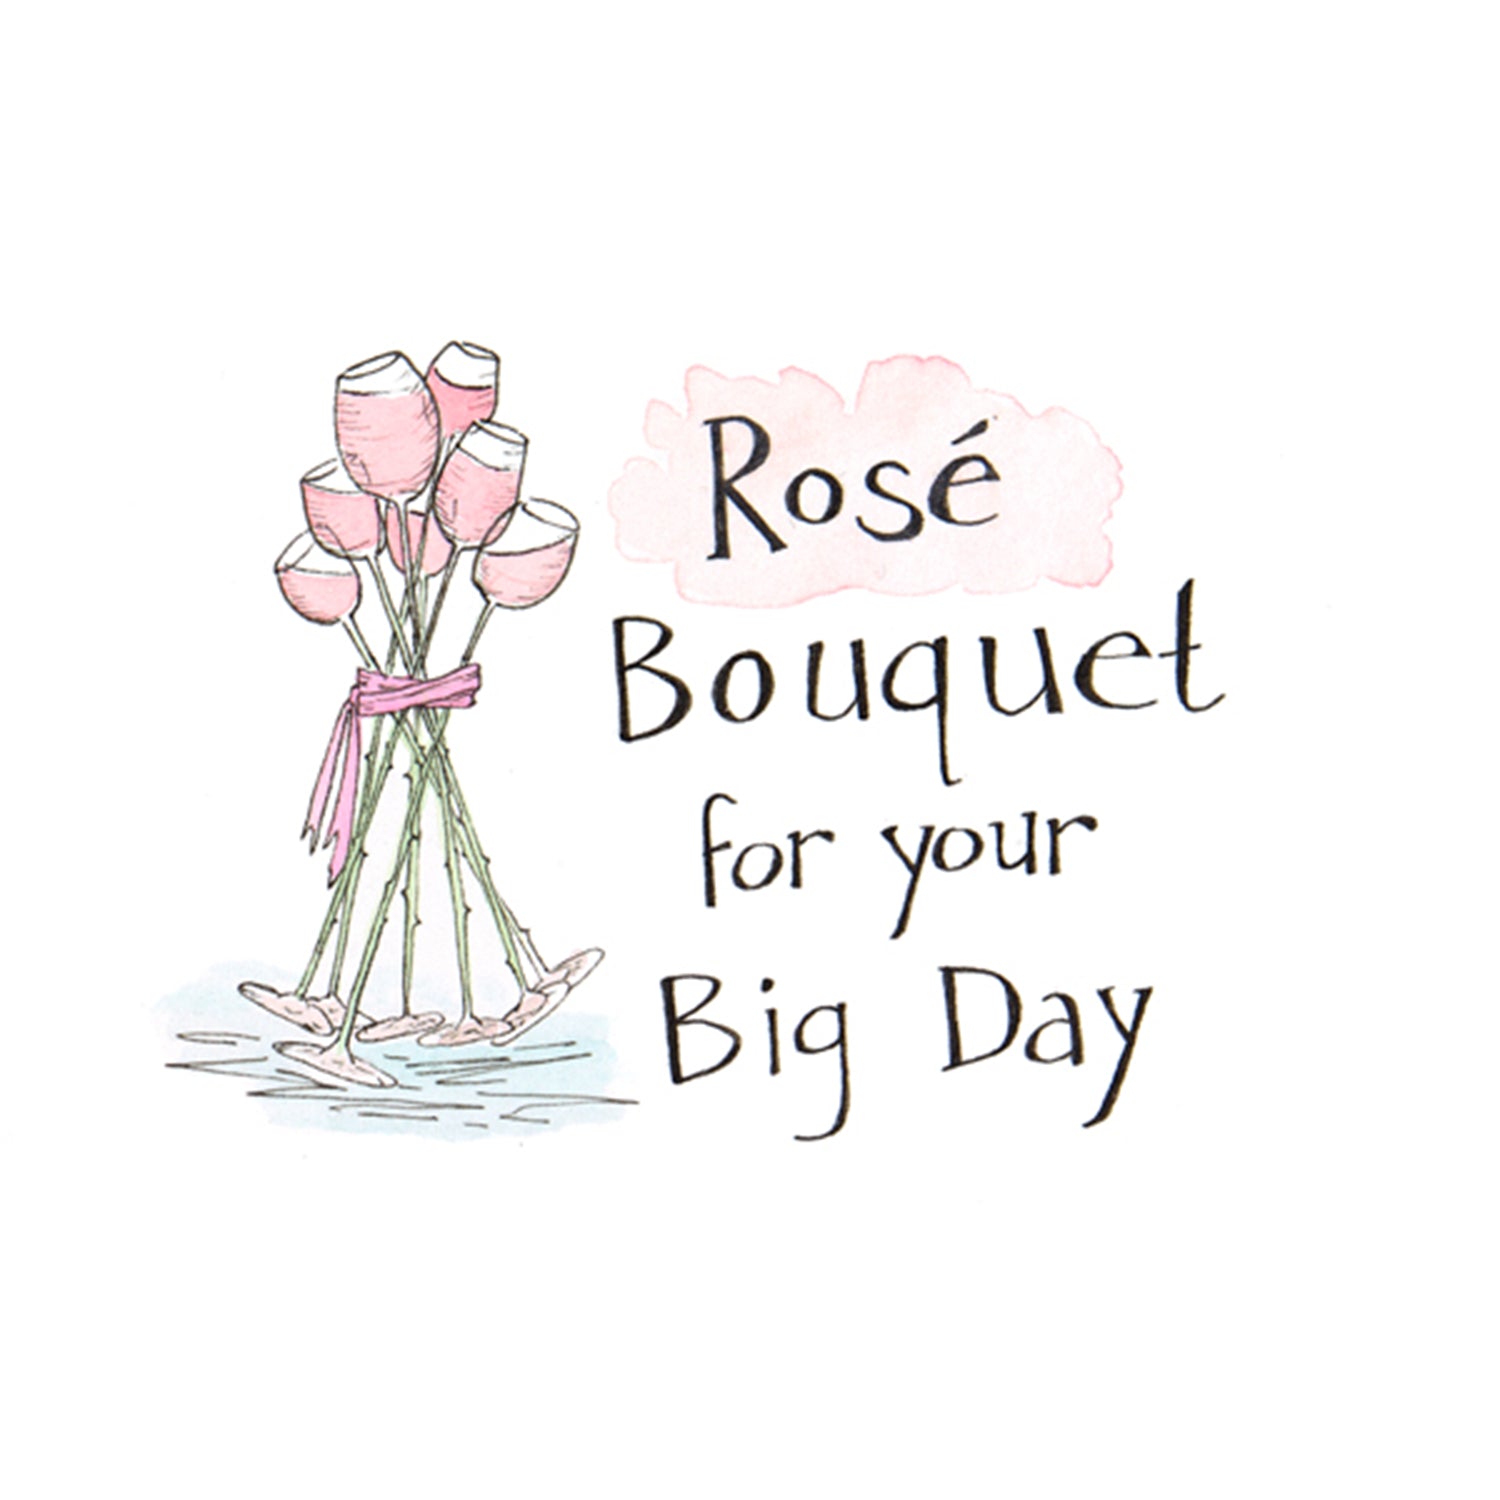 Image of a bouquet of glasses of rosé wine that are tied together with a pink ribbon. The words, "Rosé bouquet for your big day" are hand-lettered on the card.